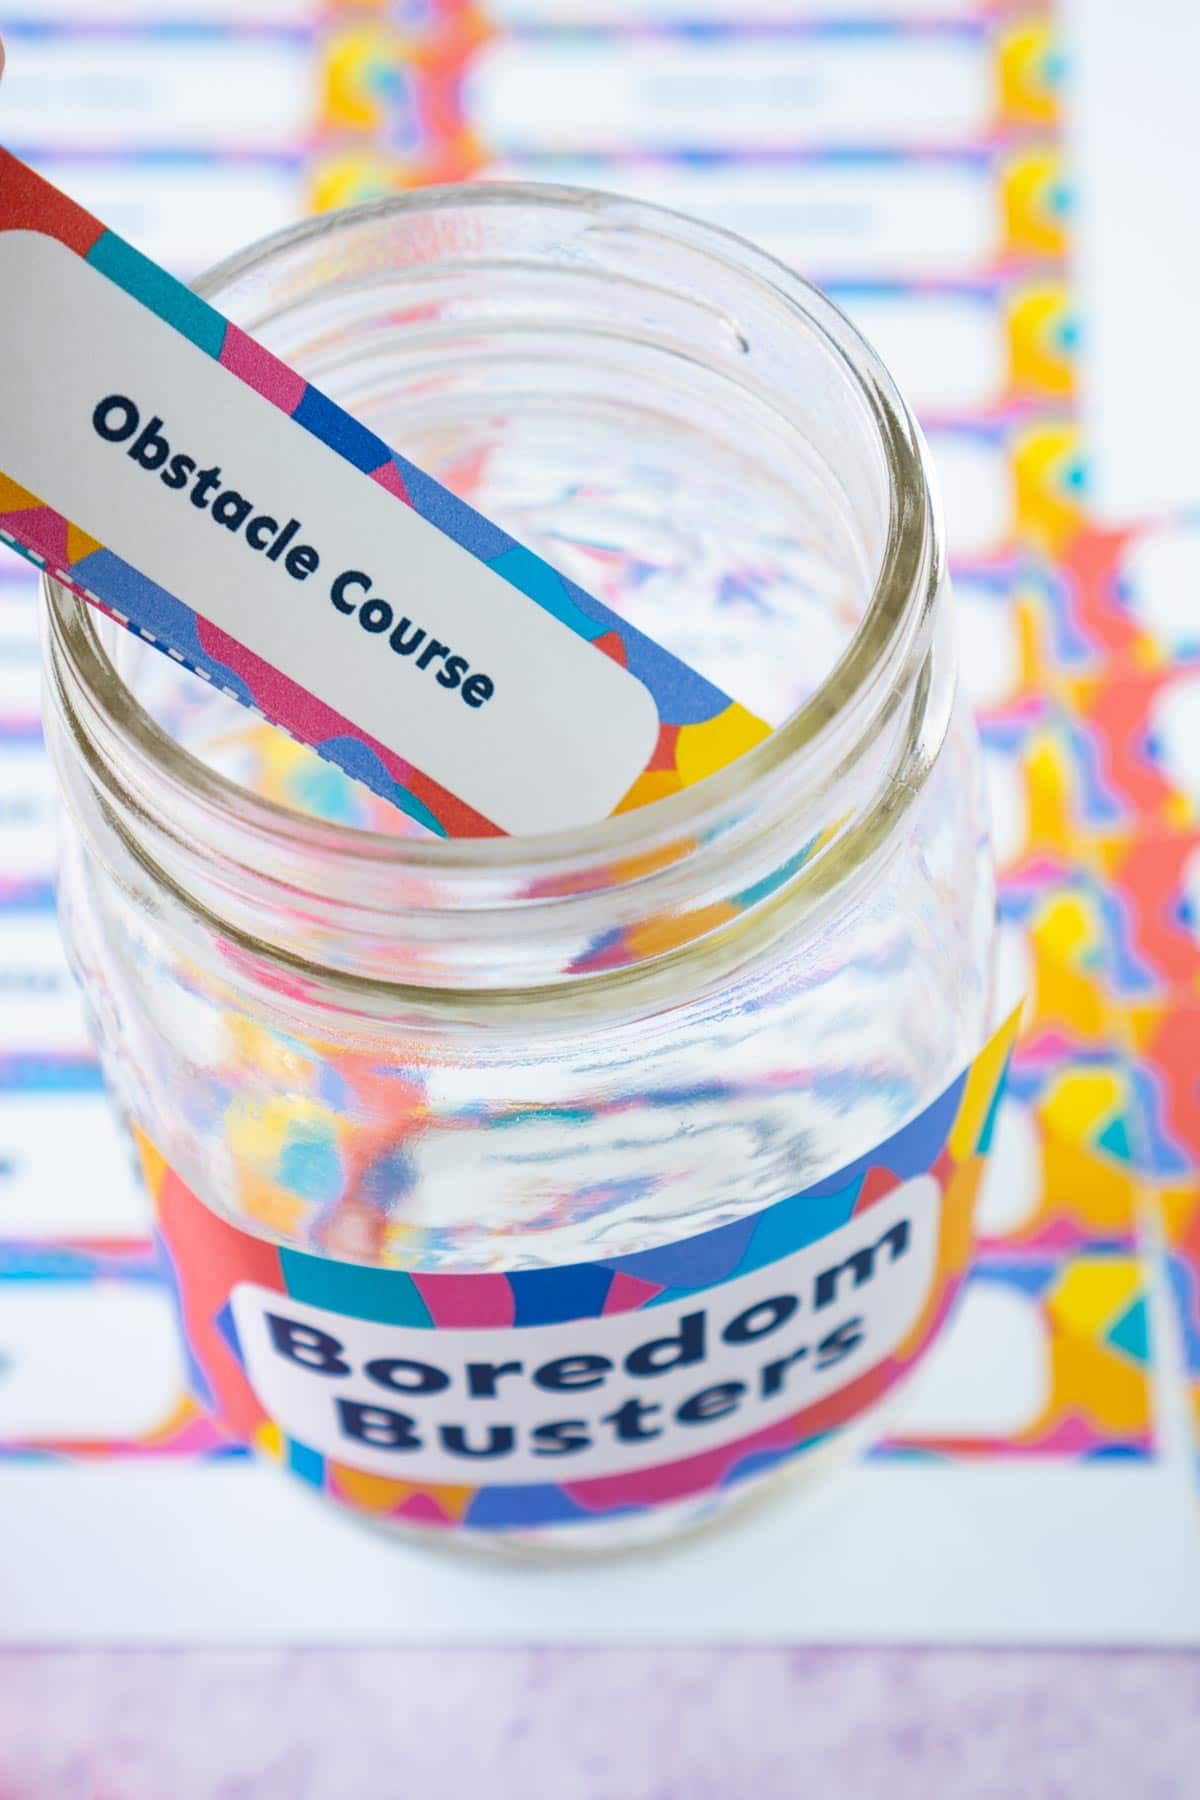 A paper that says obstacle course being placed into a glass jar